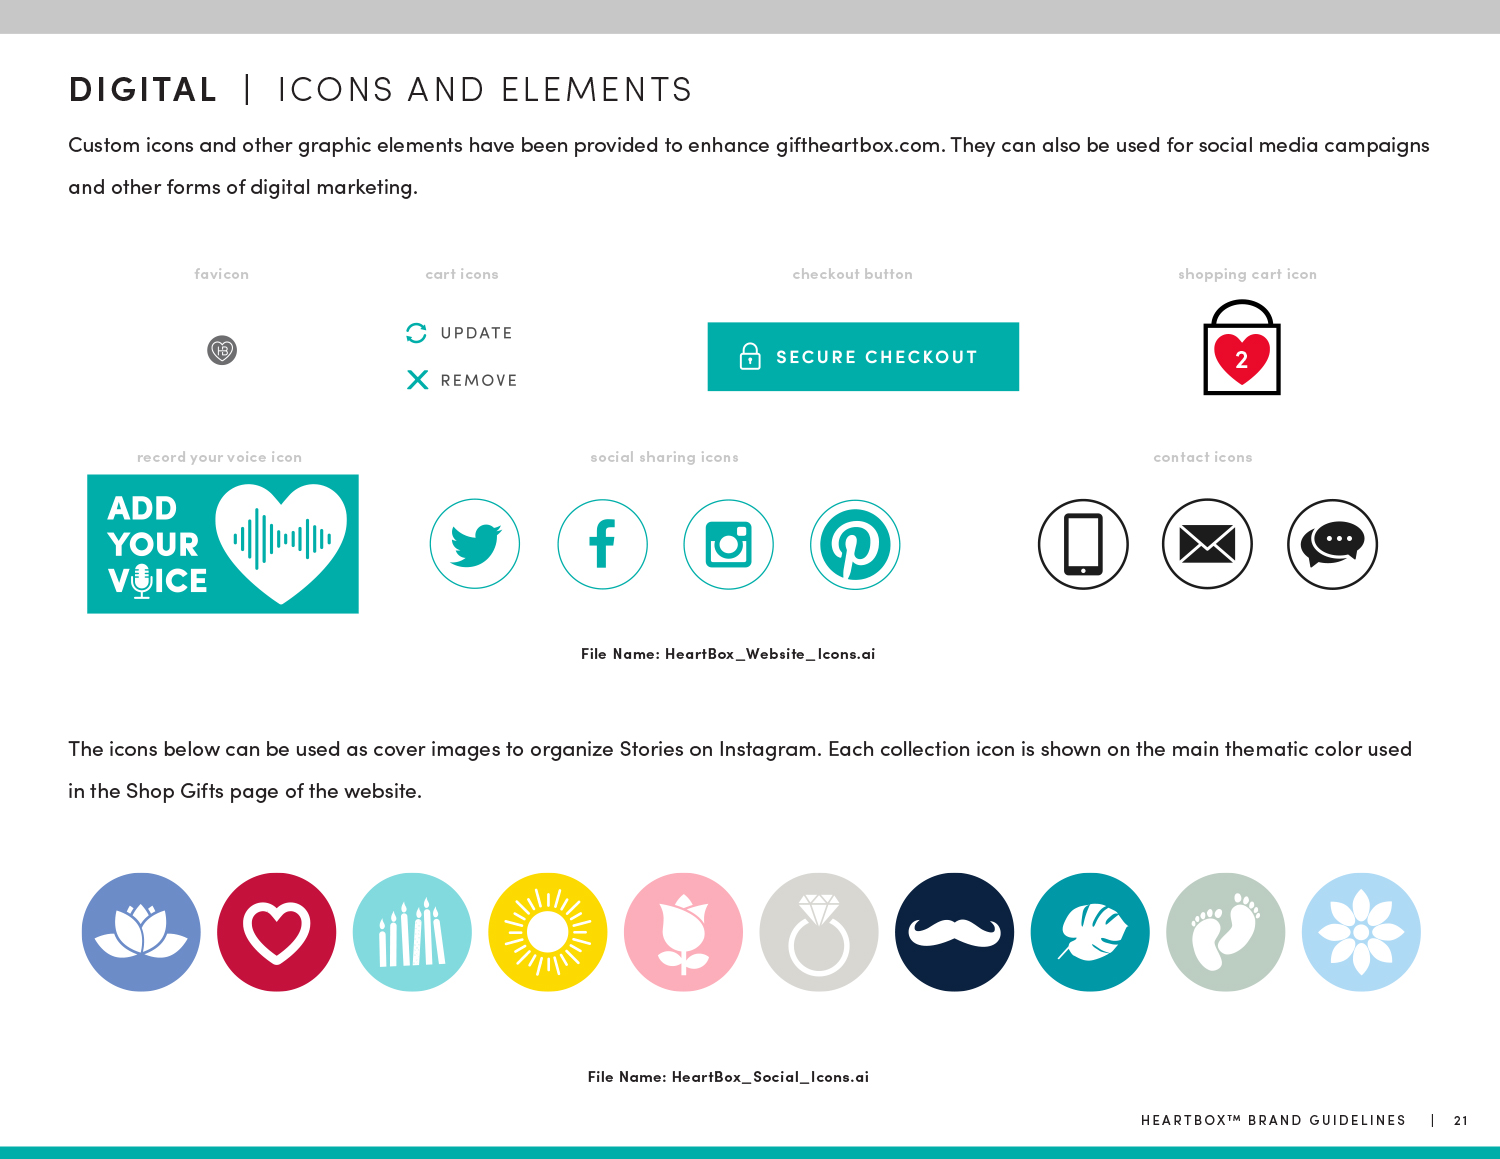 HeartBox Marketing Design Icons and Elements